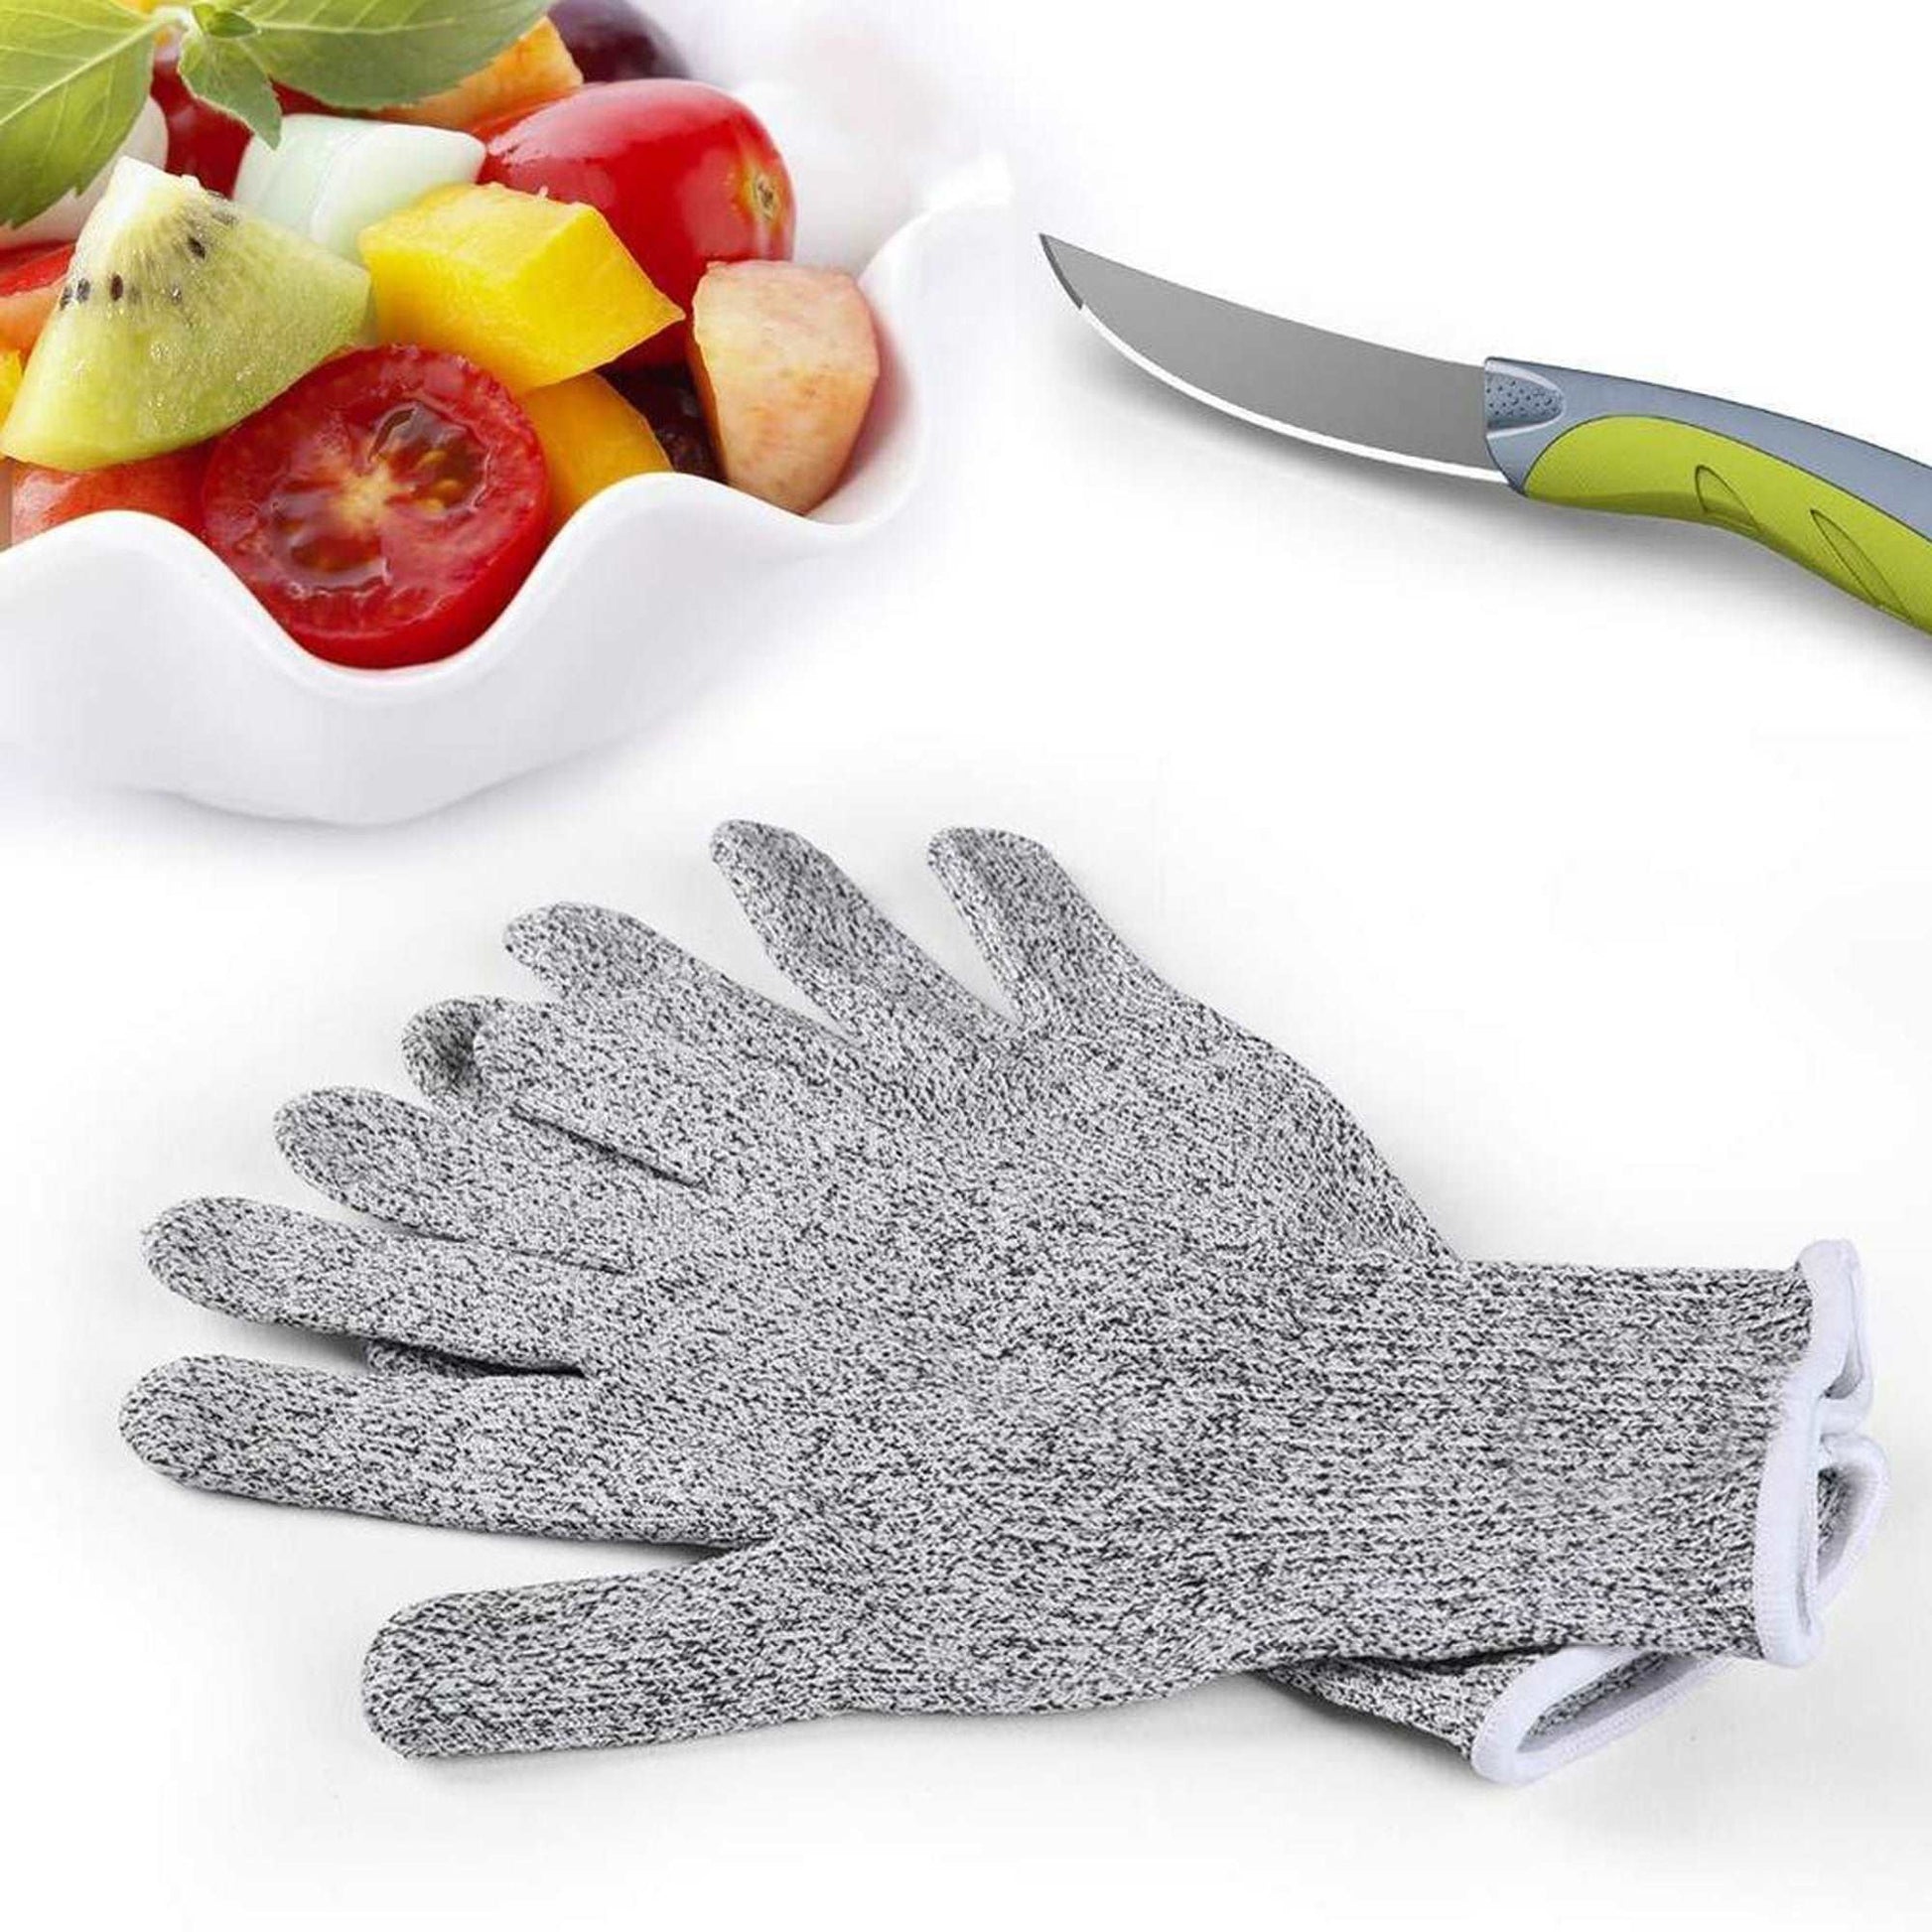 Anti Cutting Resistant Hand Safety Cut-Proof Protection Gloves  (Multicolour)